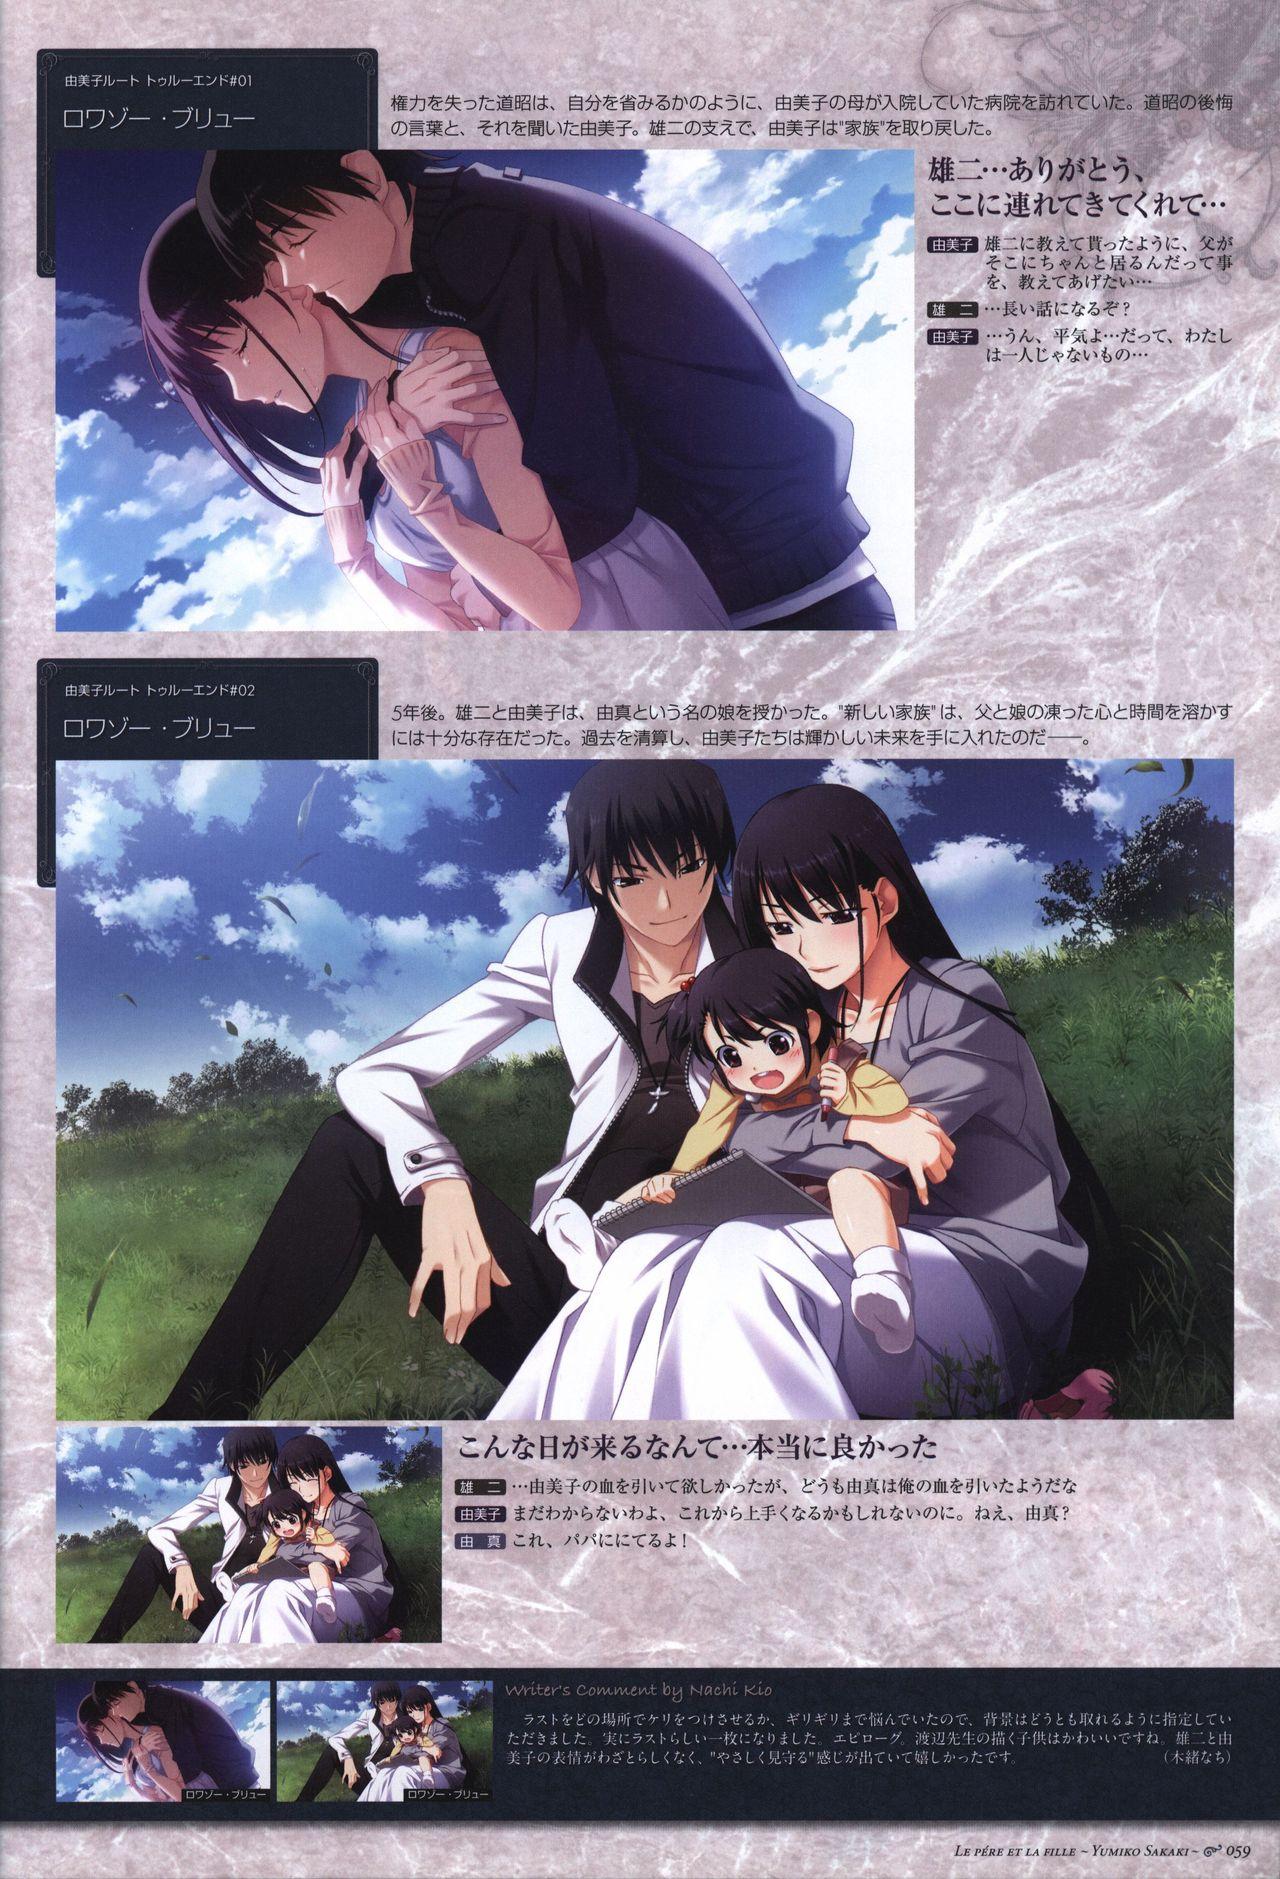 The Fruit of Grisaia Visual FanBook 59